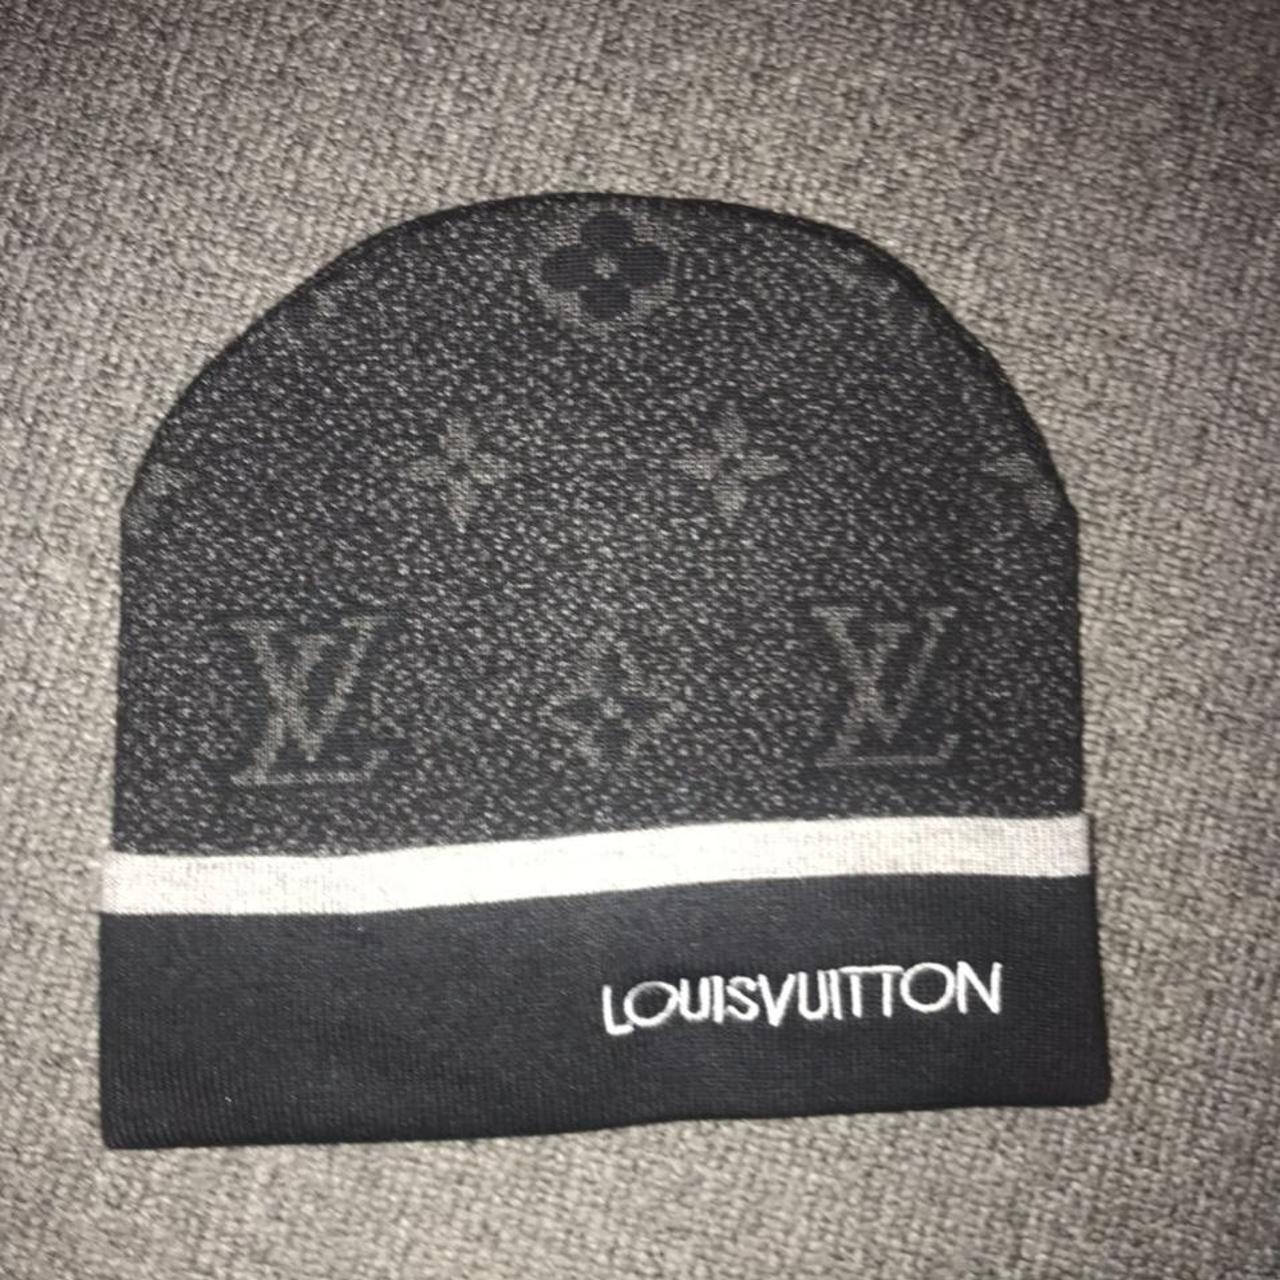 THE WAVE : NEWS! LV MONOGRAM ECLIPSE beanie now in stock!,check real videos  and picture compare direclty! BIG G cap is been update ,now is alignment  perfect all around! And we are